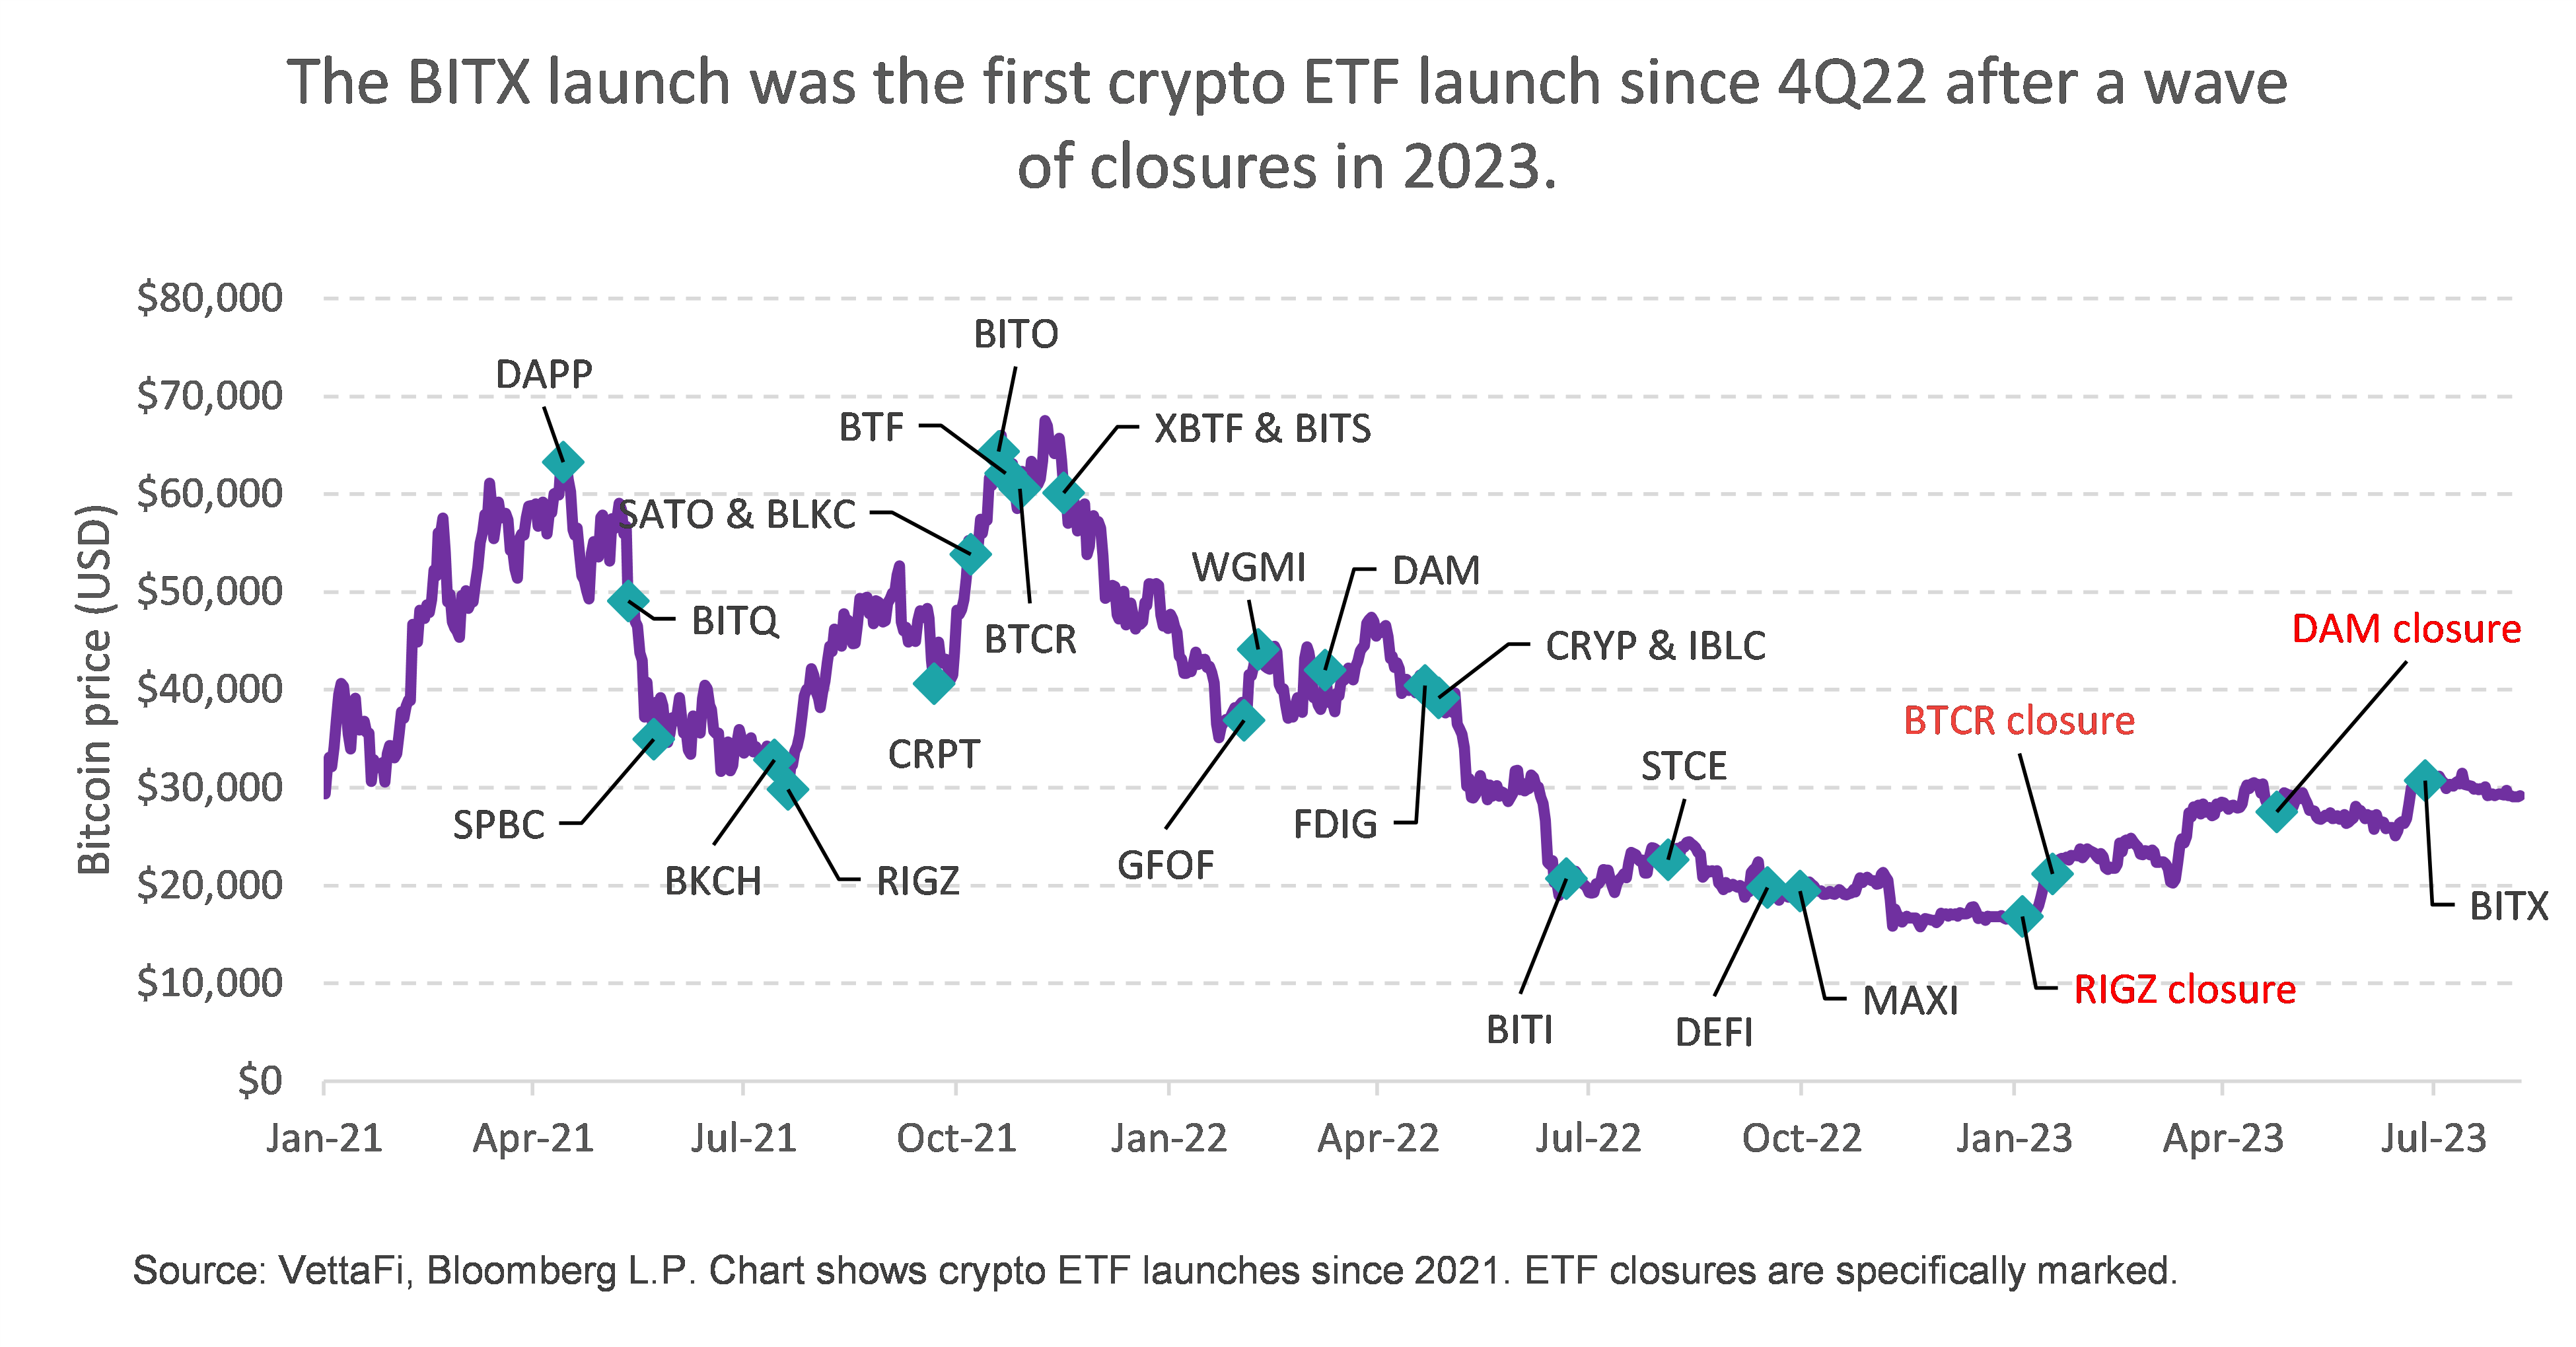 Crypto ETF Closures and BITX Launch